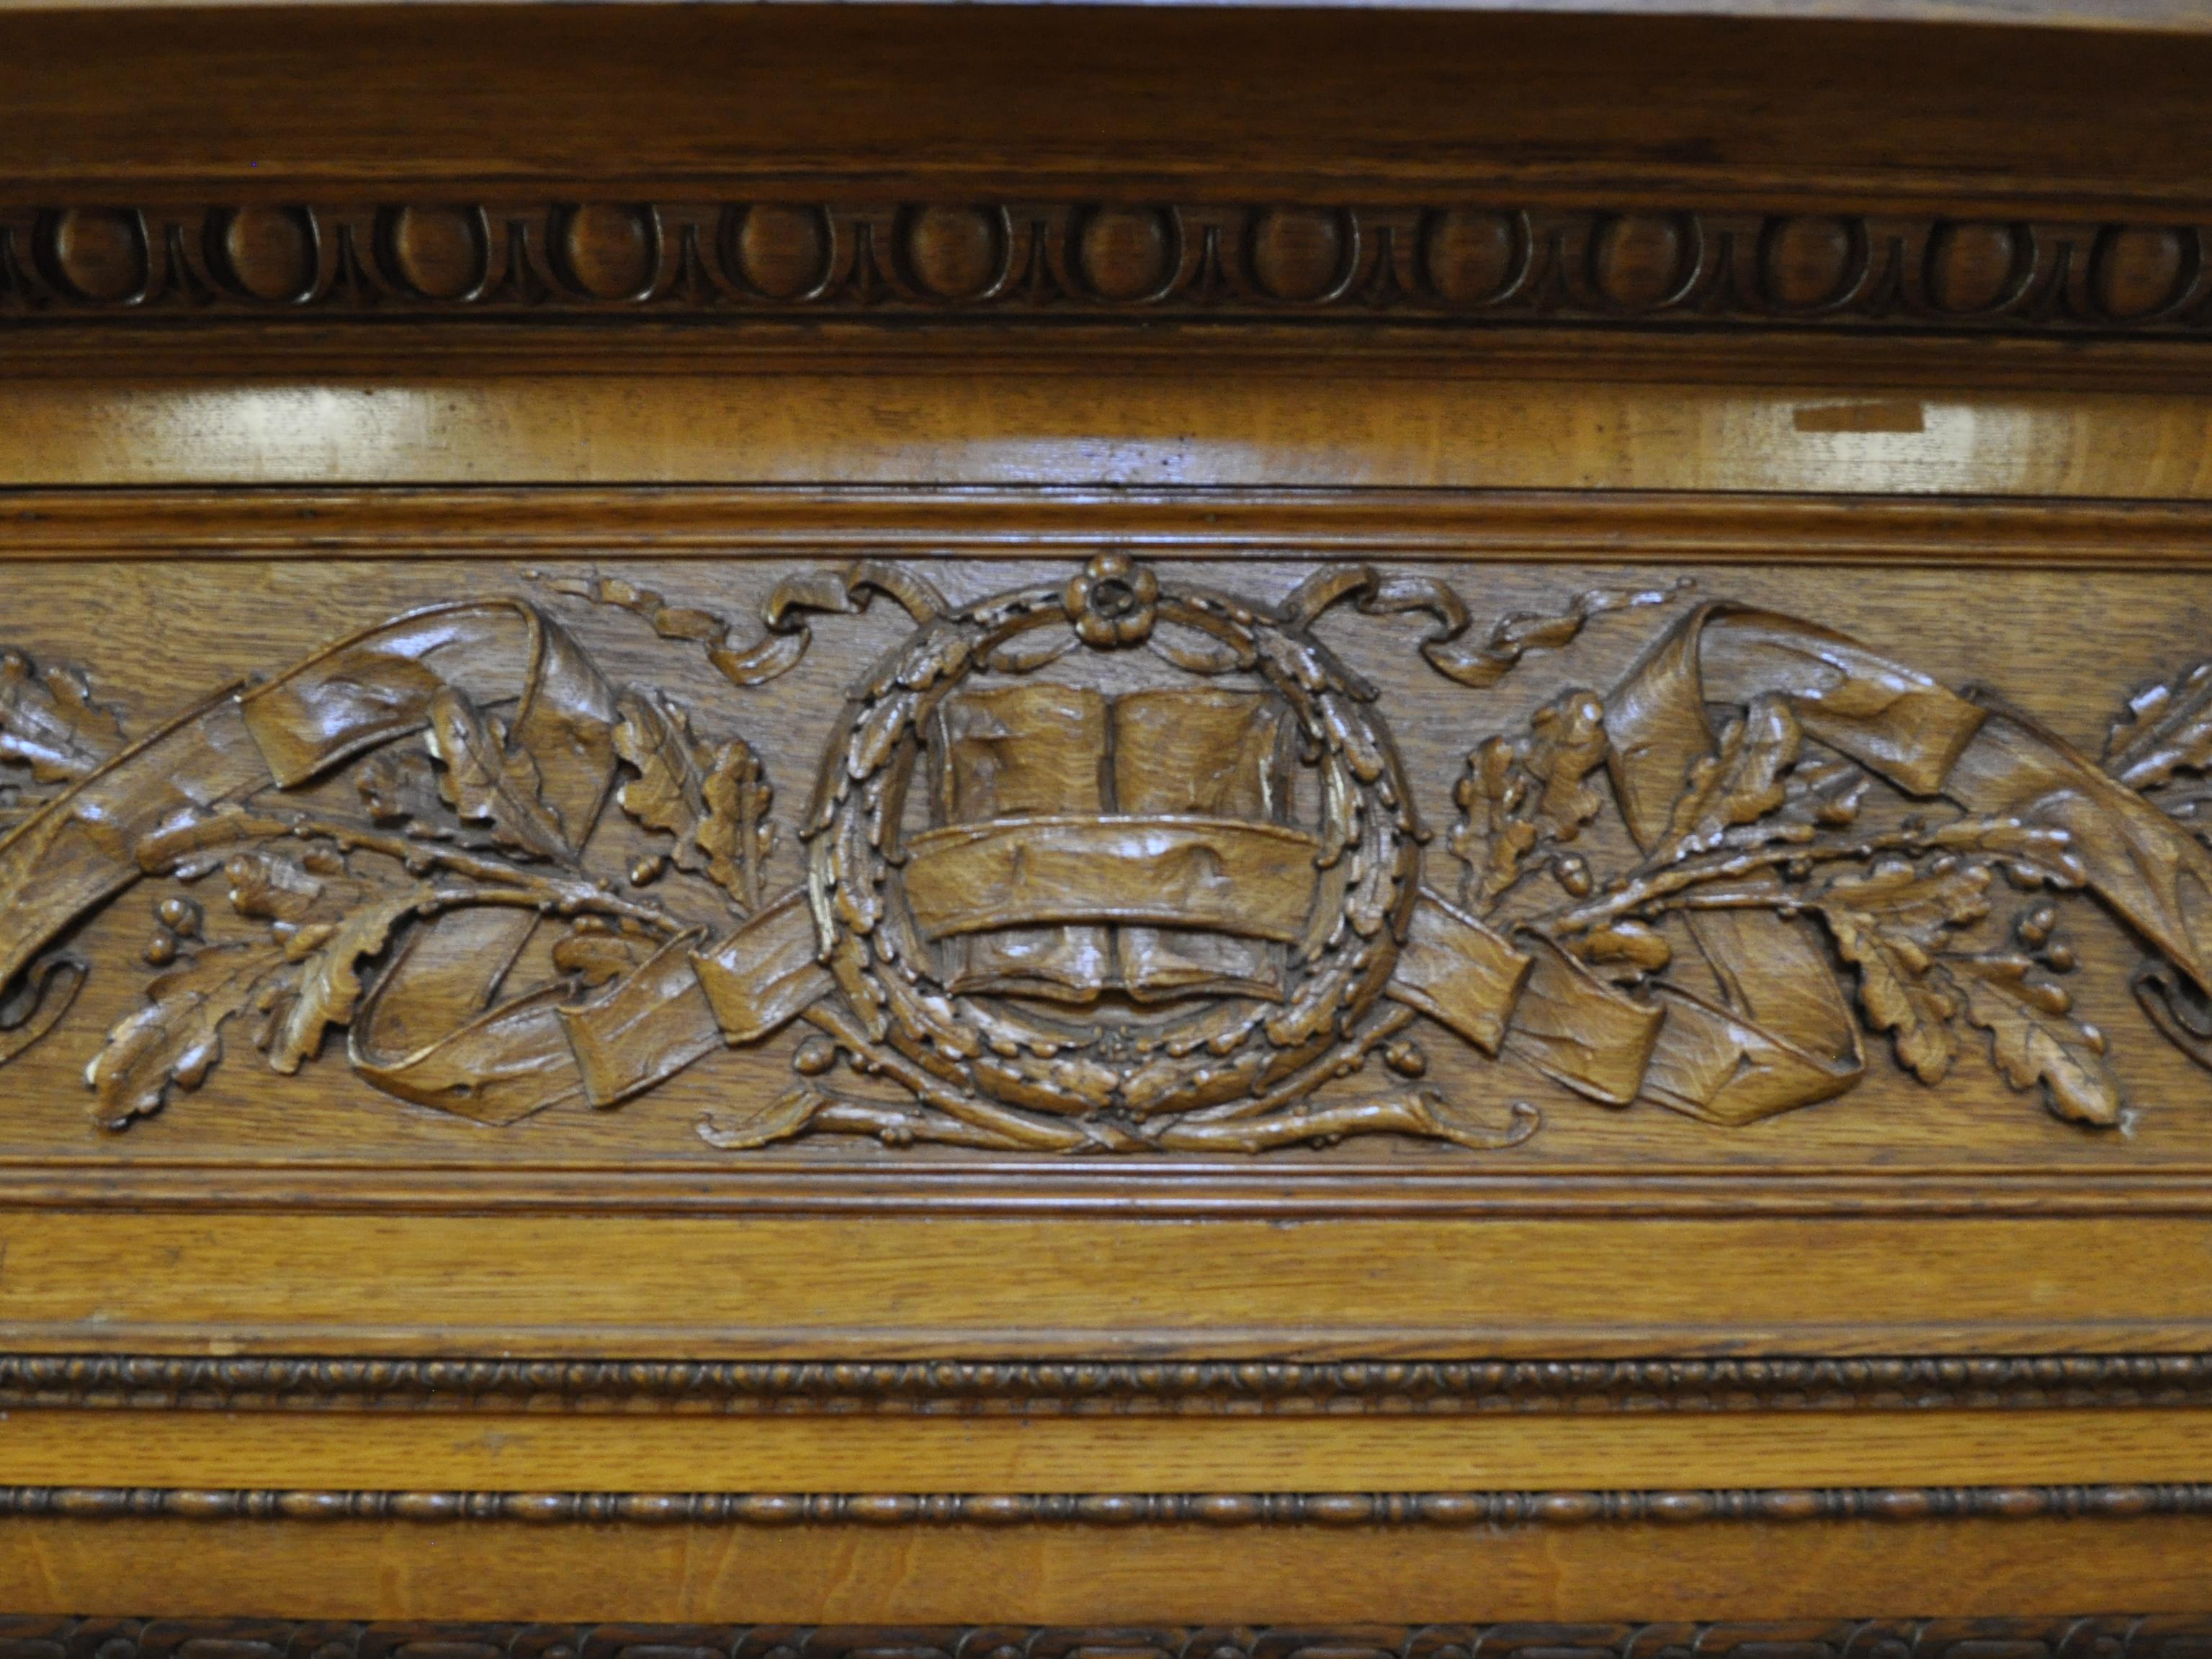 Detail of the decorative woodwork above the fireplace in the Teem Room, depicting an open book among oak leaves.